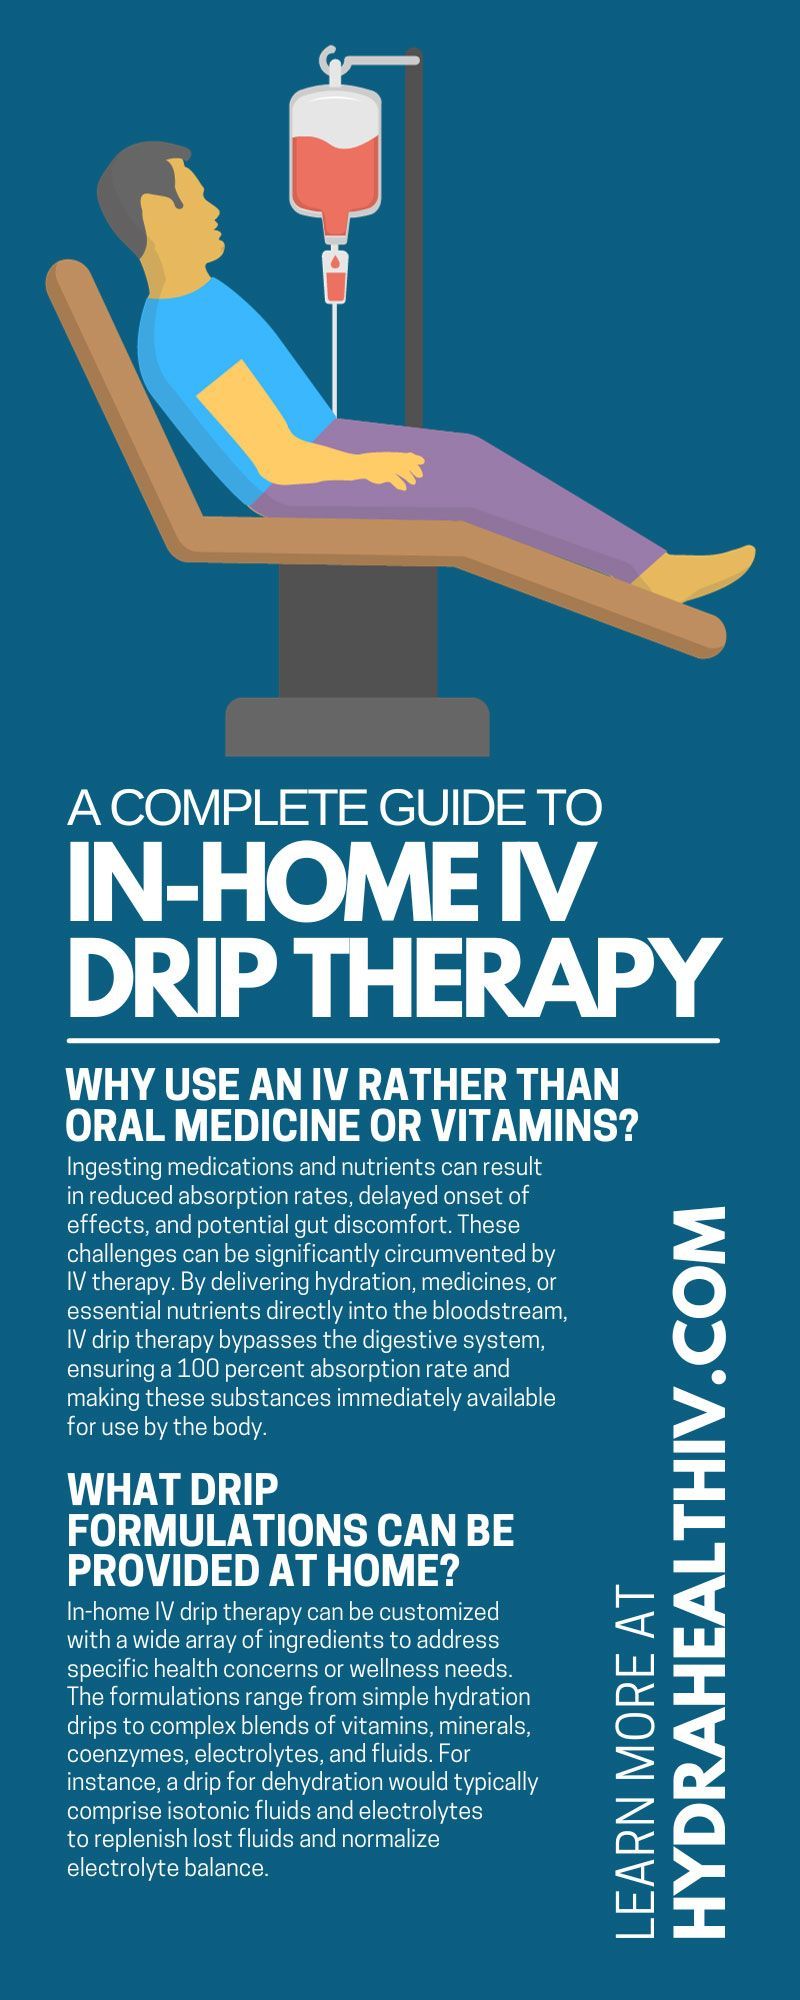 A Complete Guide to In-Home IV Drip Therapy